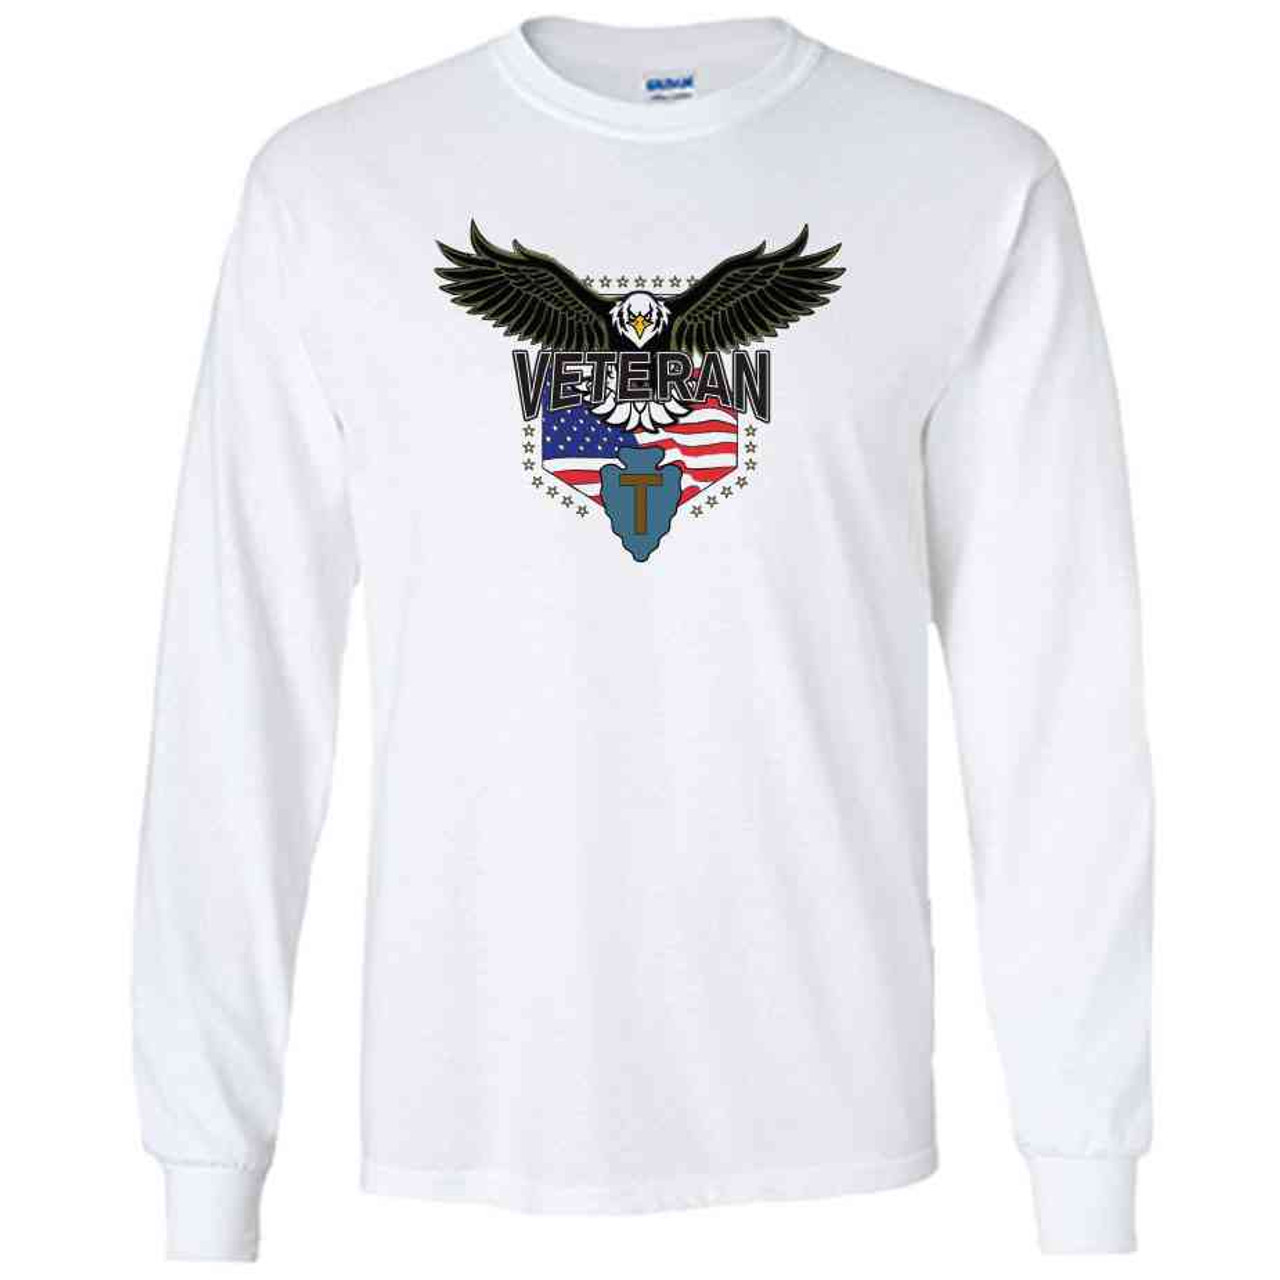 36th infantry division w eagle white long sleeve shirt